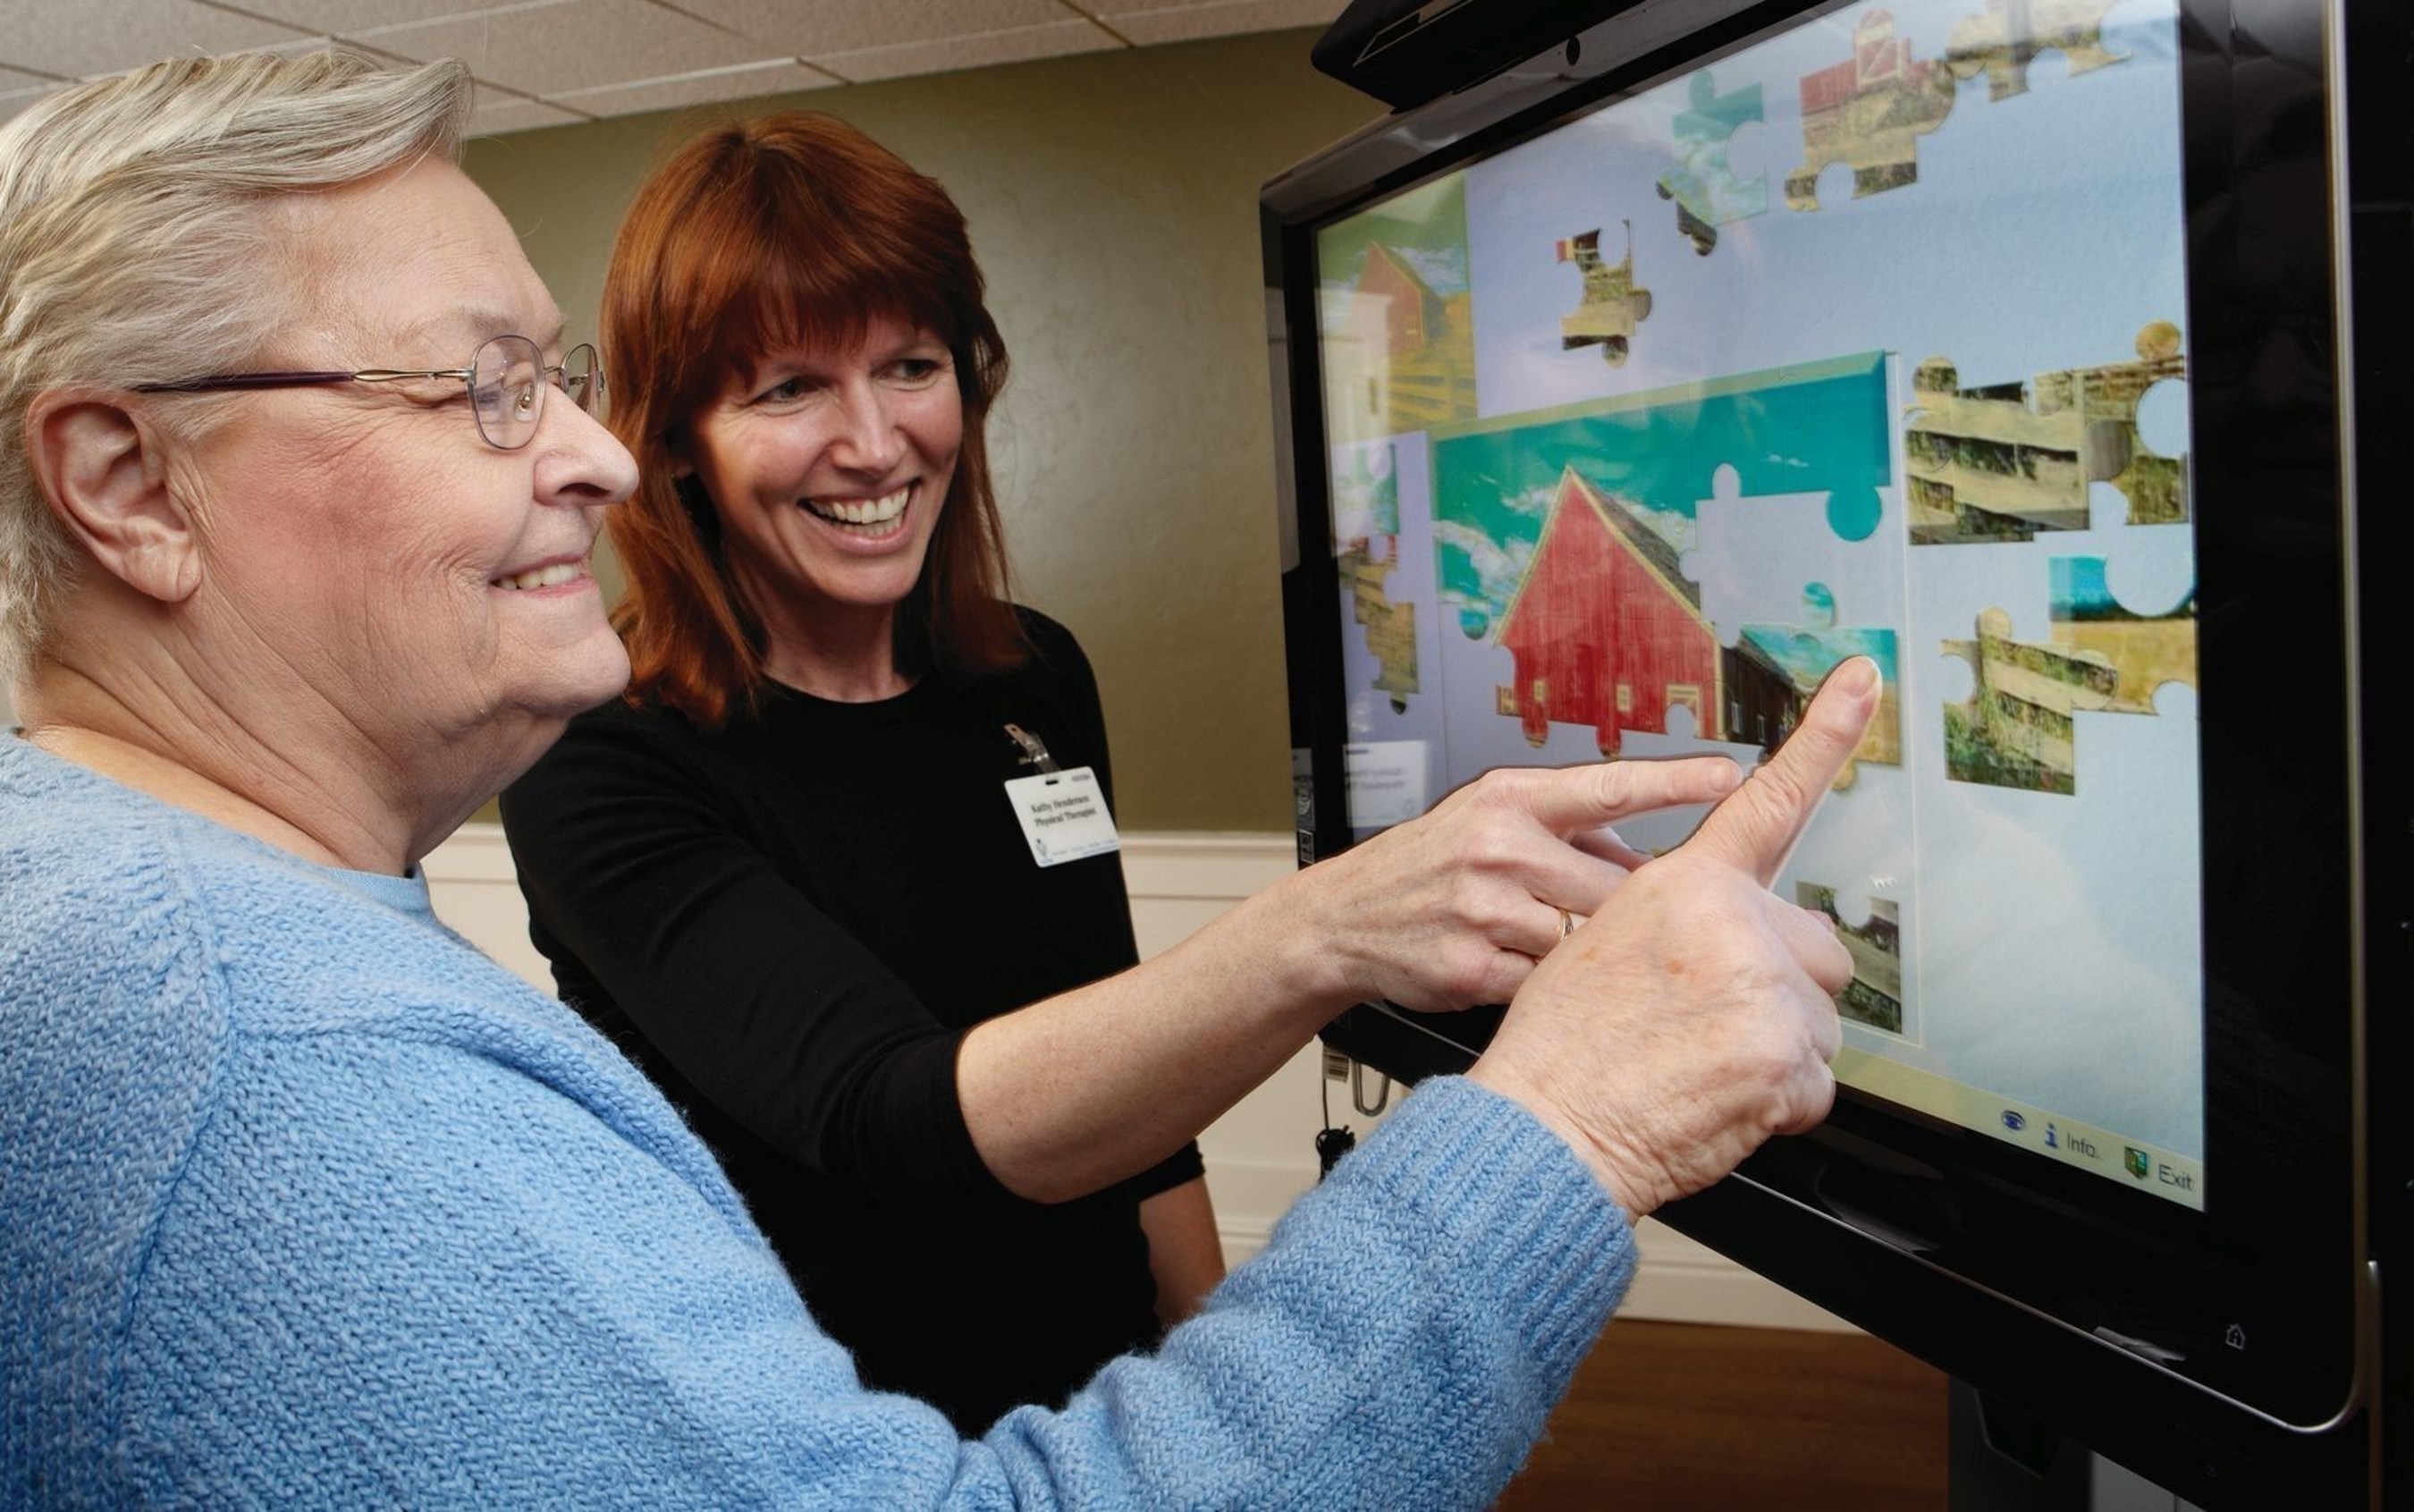 A caregiver uses iN2L technology to foster interaction with a resident. Research shows this technology can revive engagement and strengthen connections with family members.